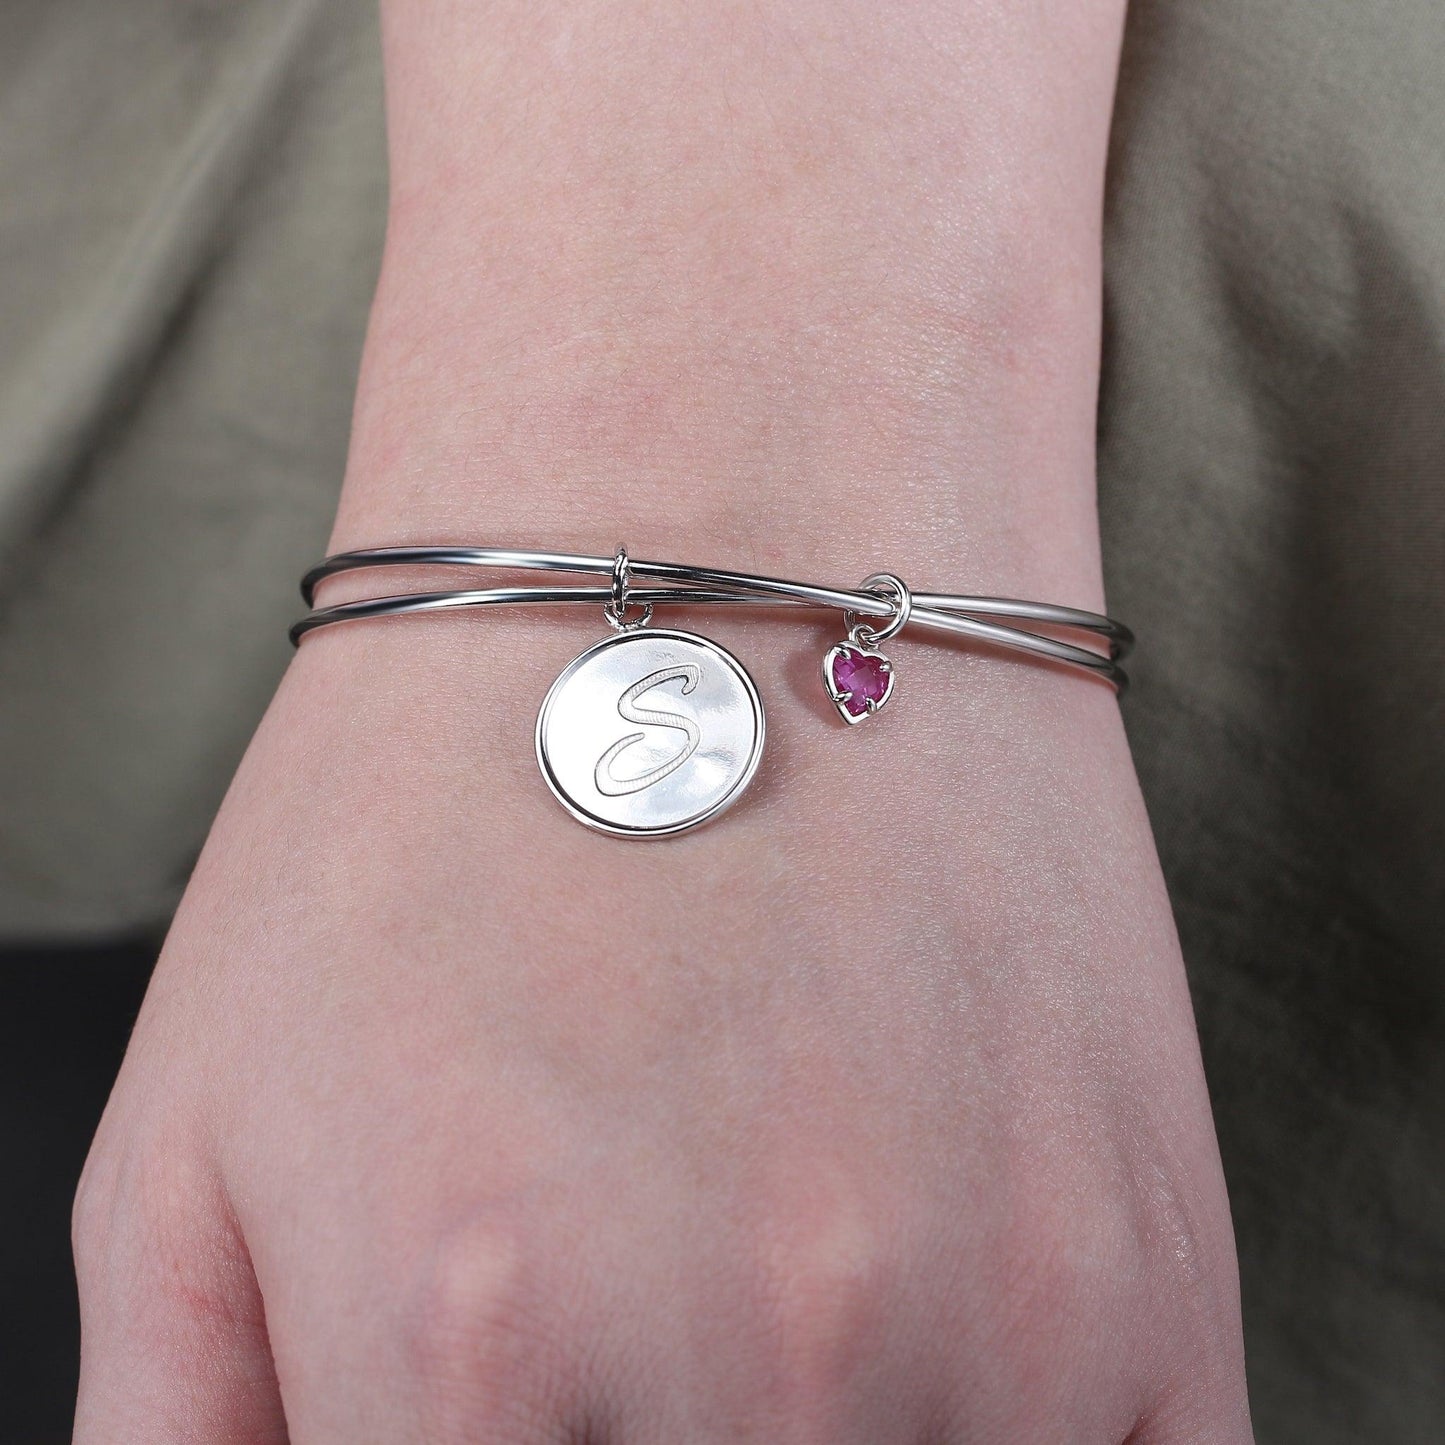 Infinity Initial Bracelet is crafted in sterling silver, include initial letter and birthstone charms.